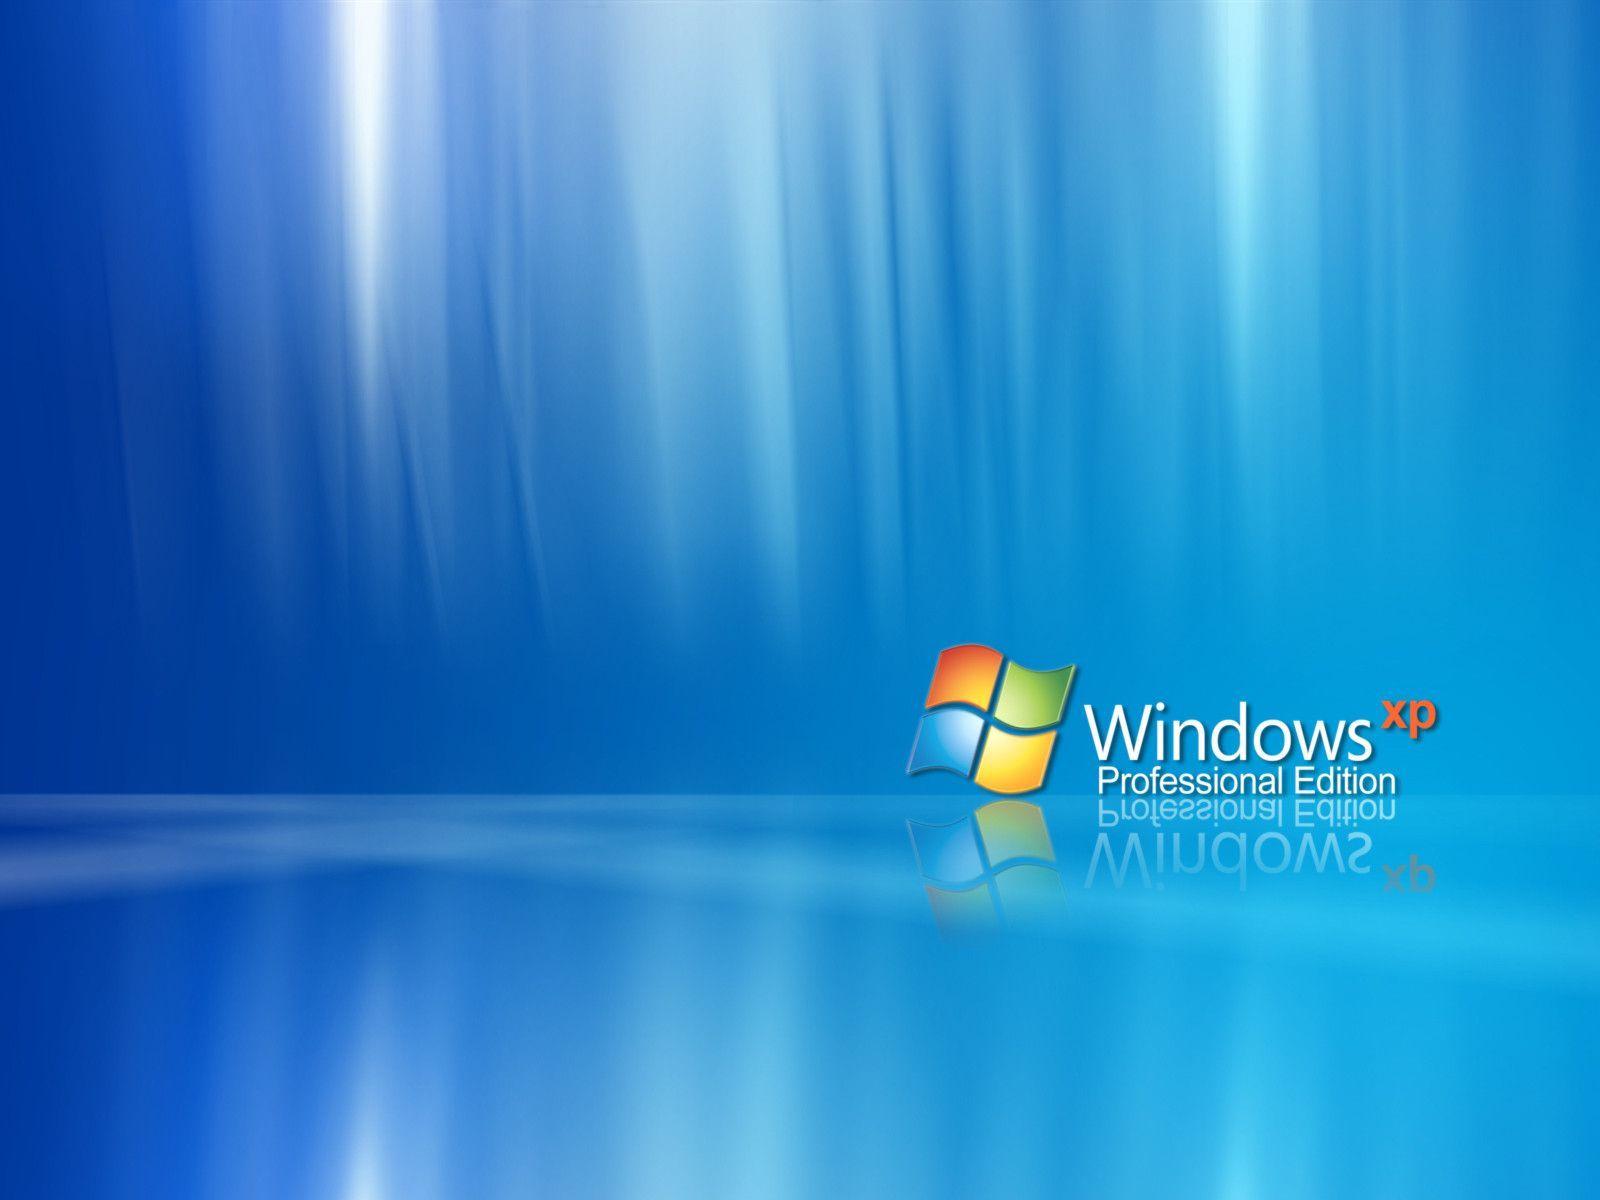 Windows Xp Hd Wallpapers Free Download Wallpapers